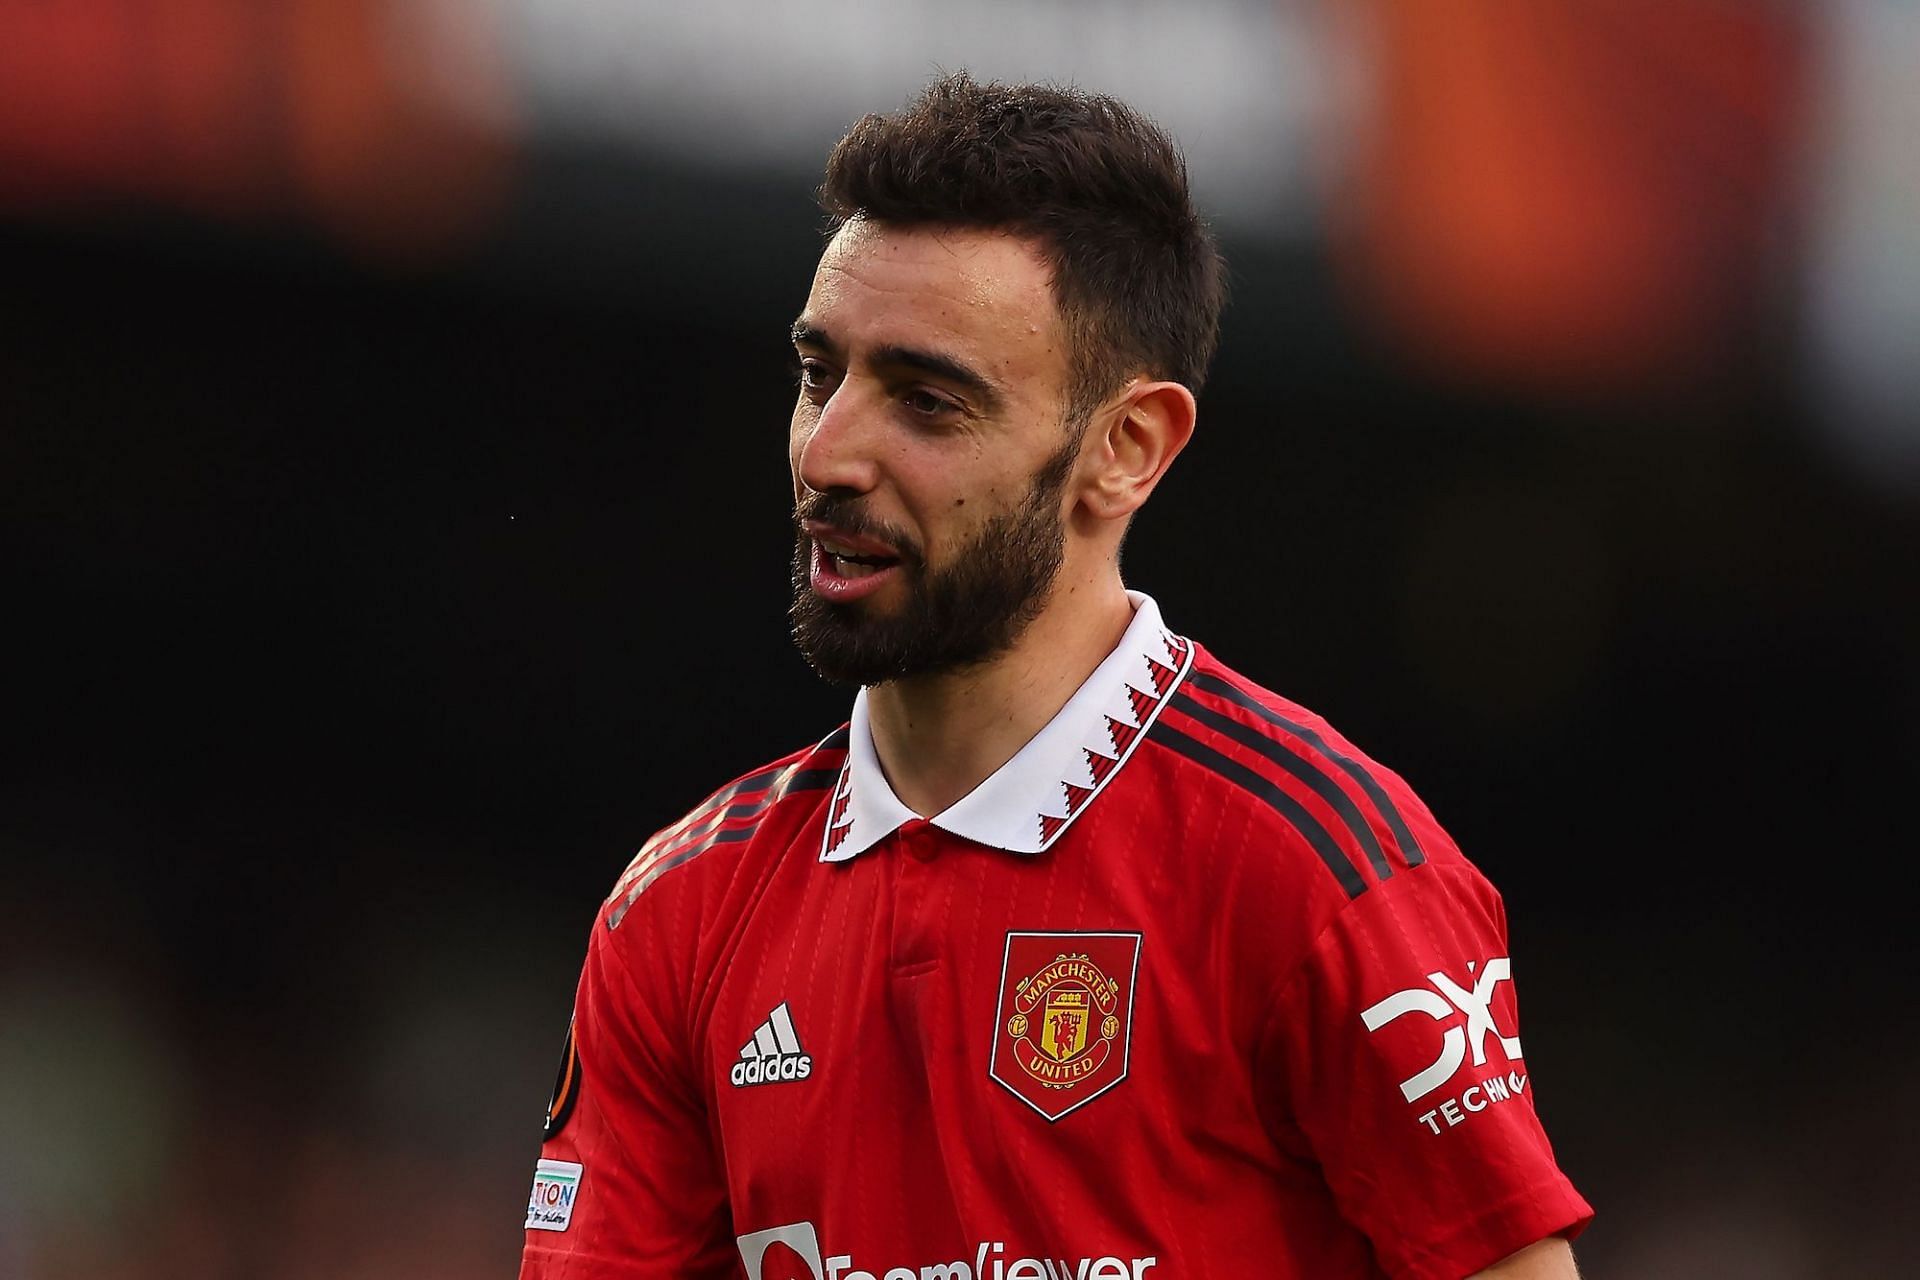 Bruno Fernandes can form a potent midfield combination with Christian Eriksen